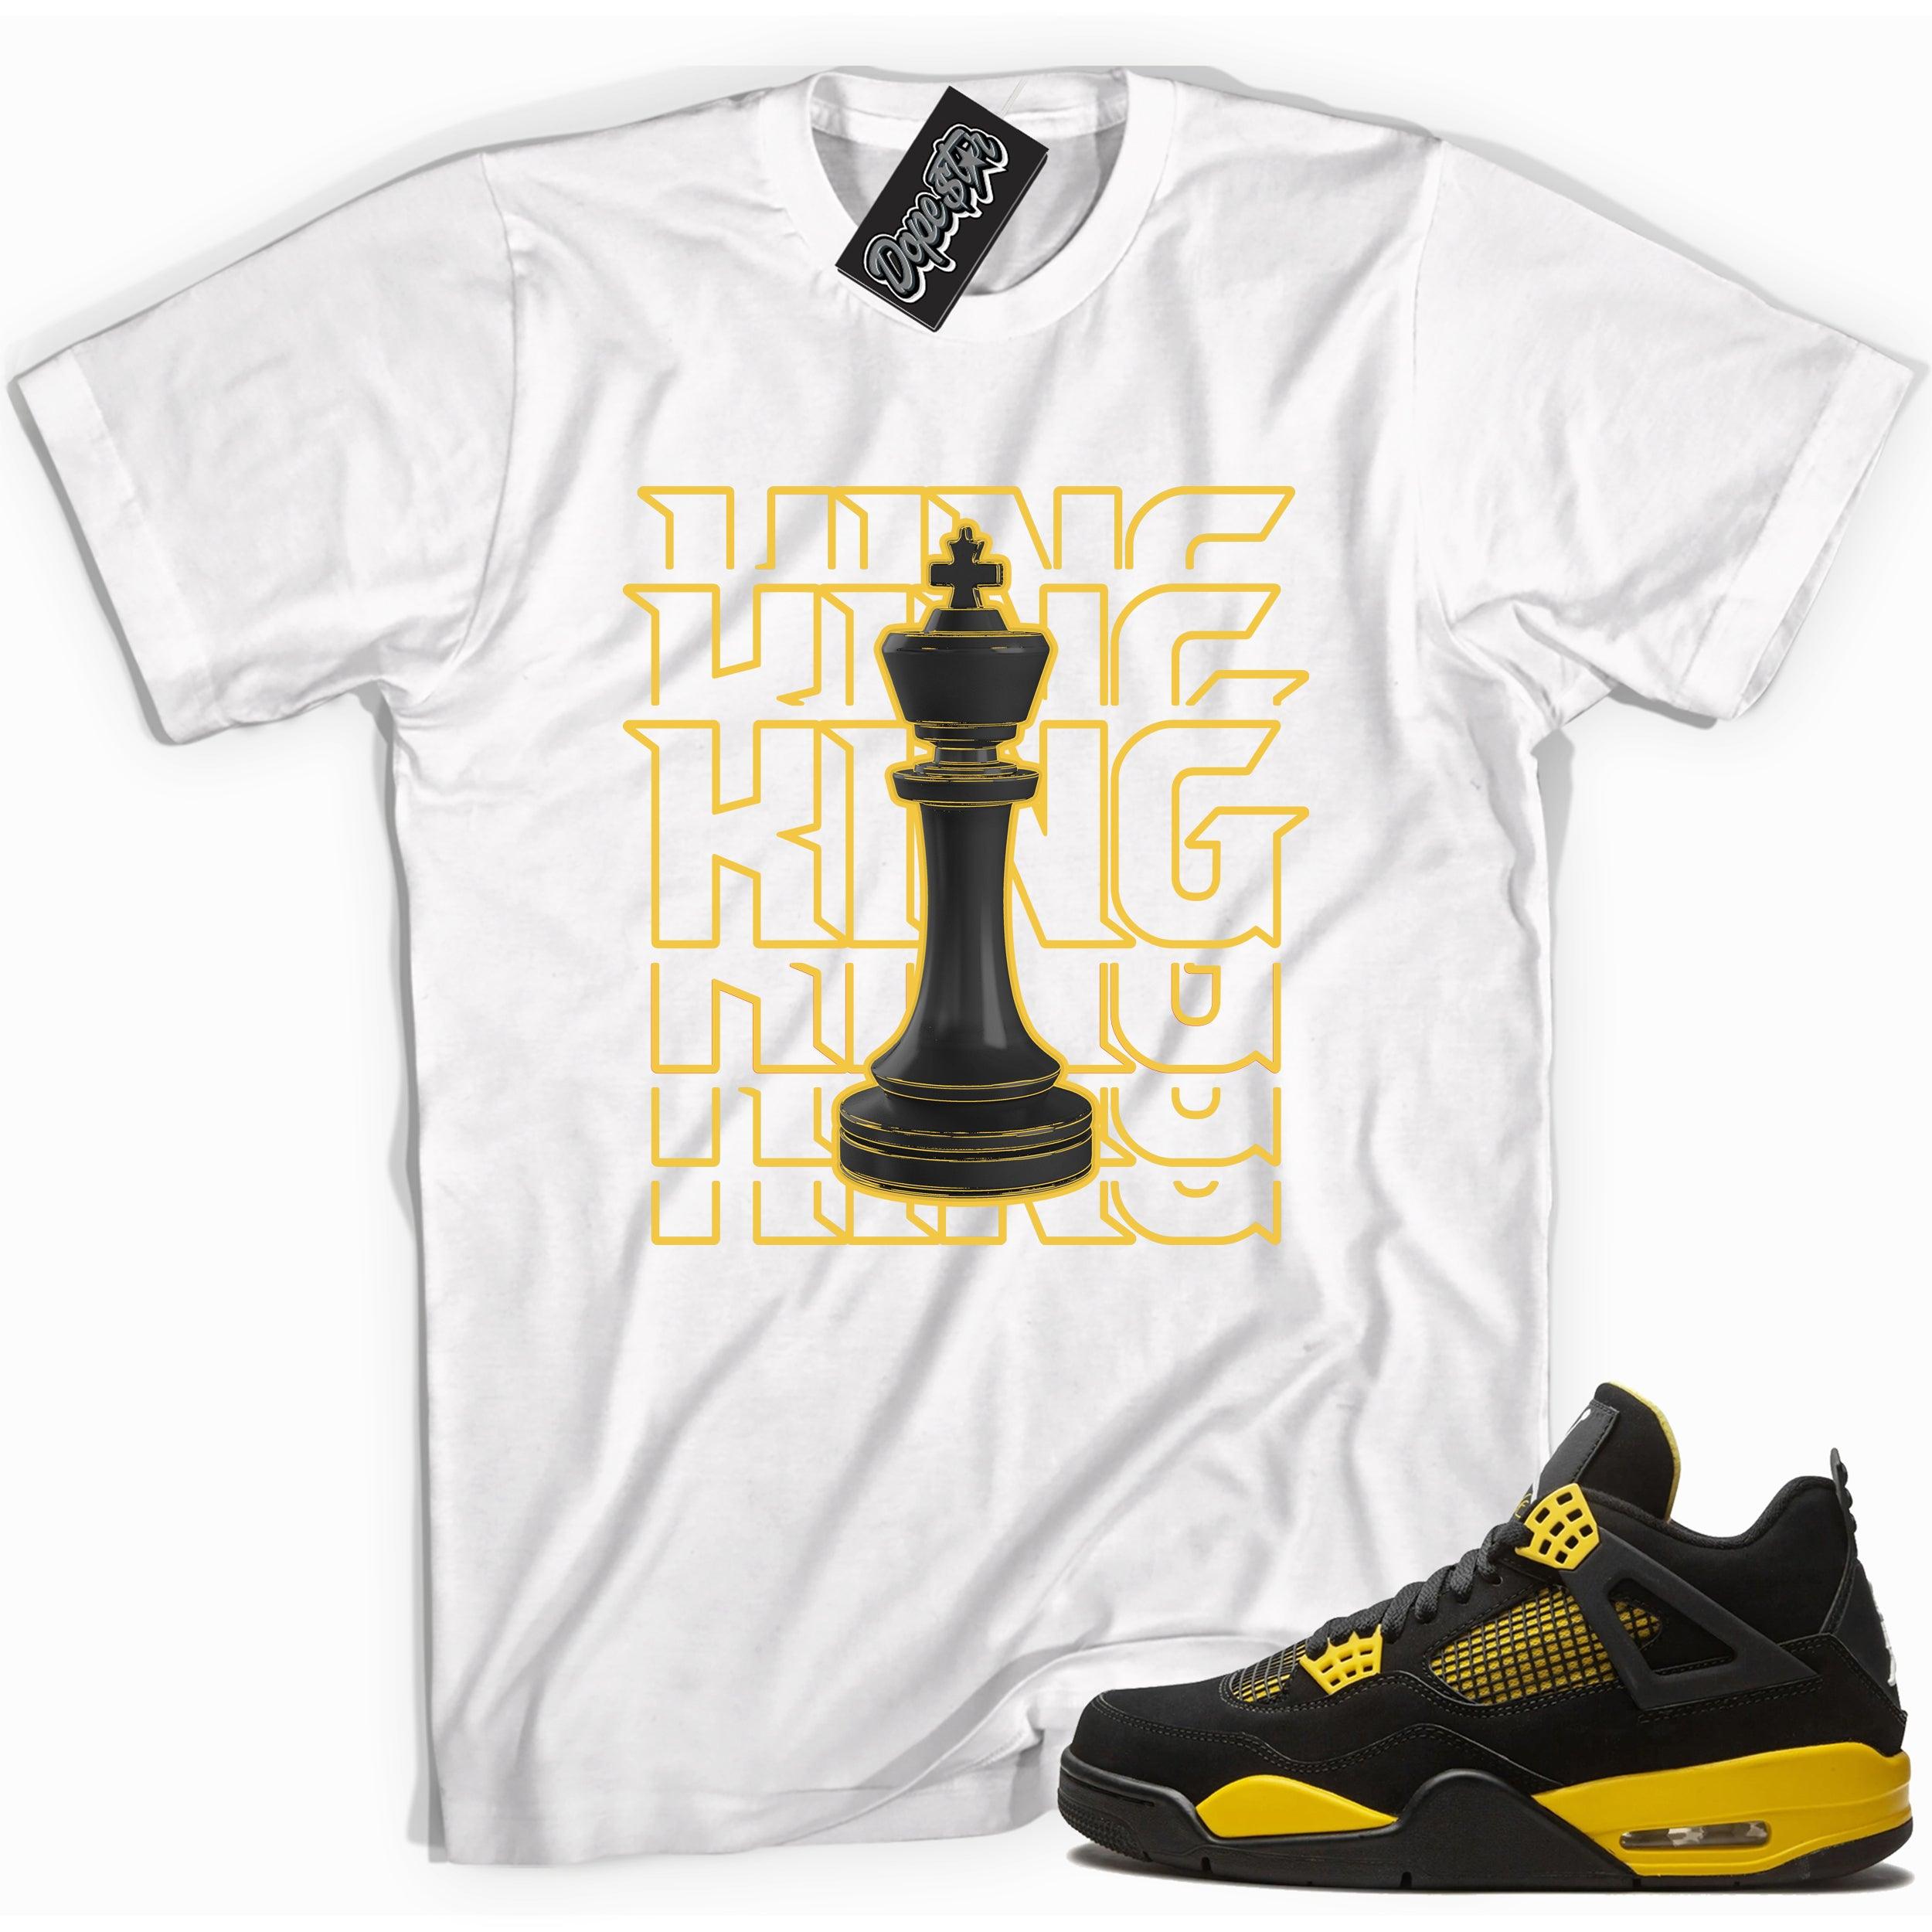 Cool white graphic tee with 'King chess piece' print, that perfectly matches Air Jordan 4 Thunder sneakers